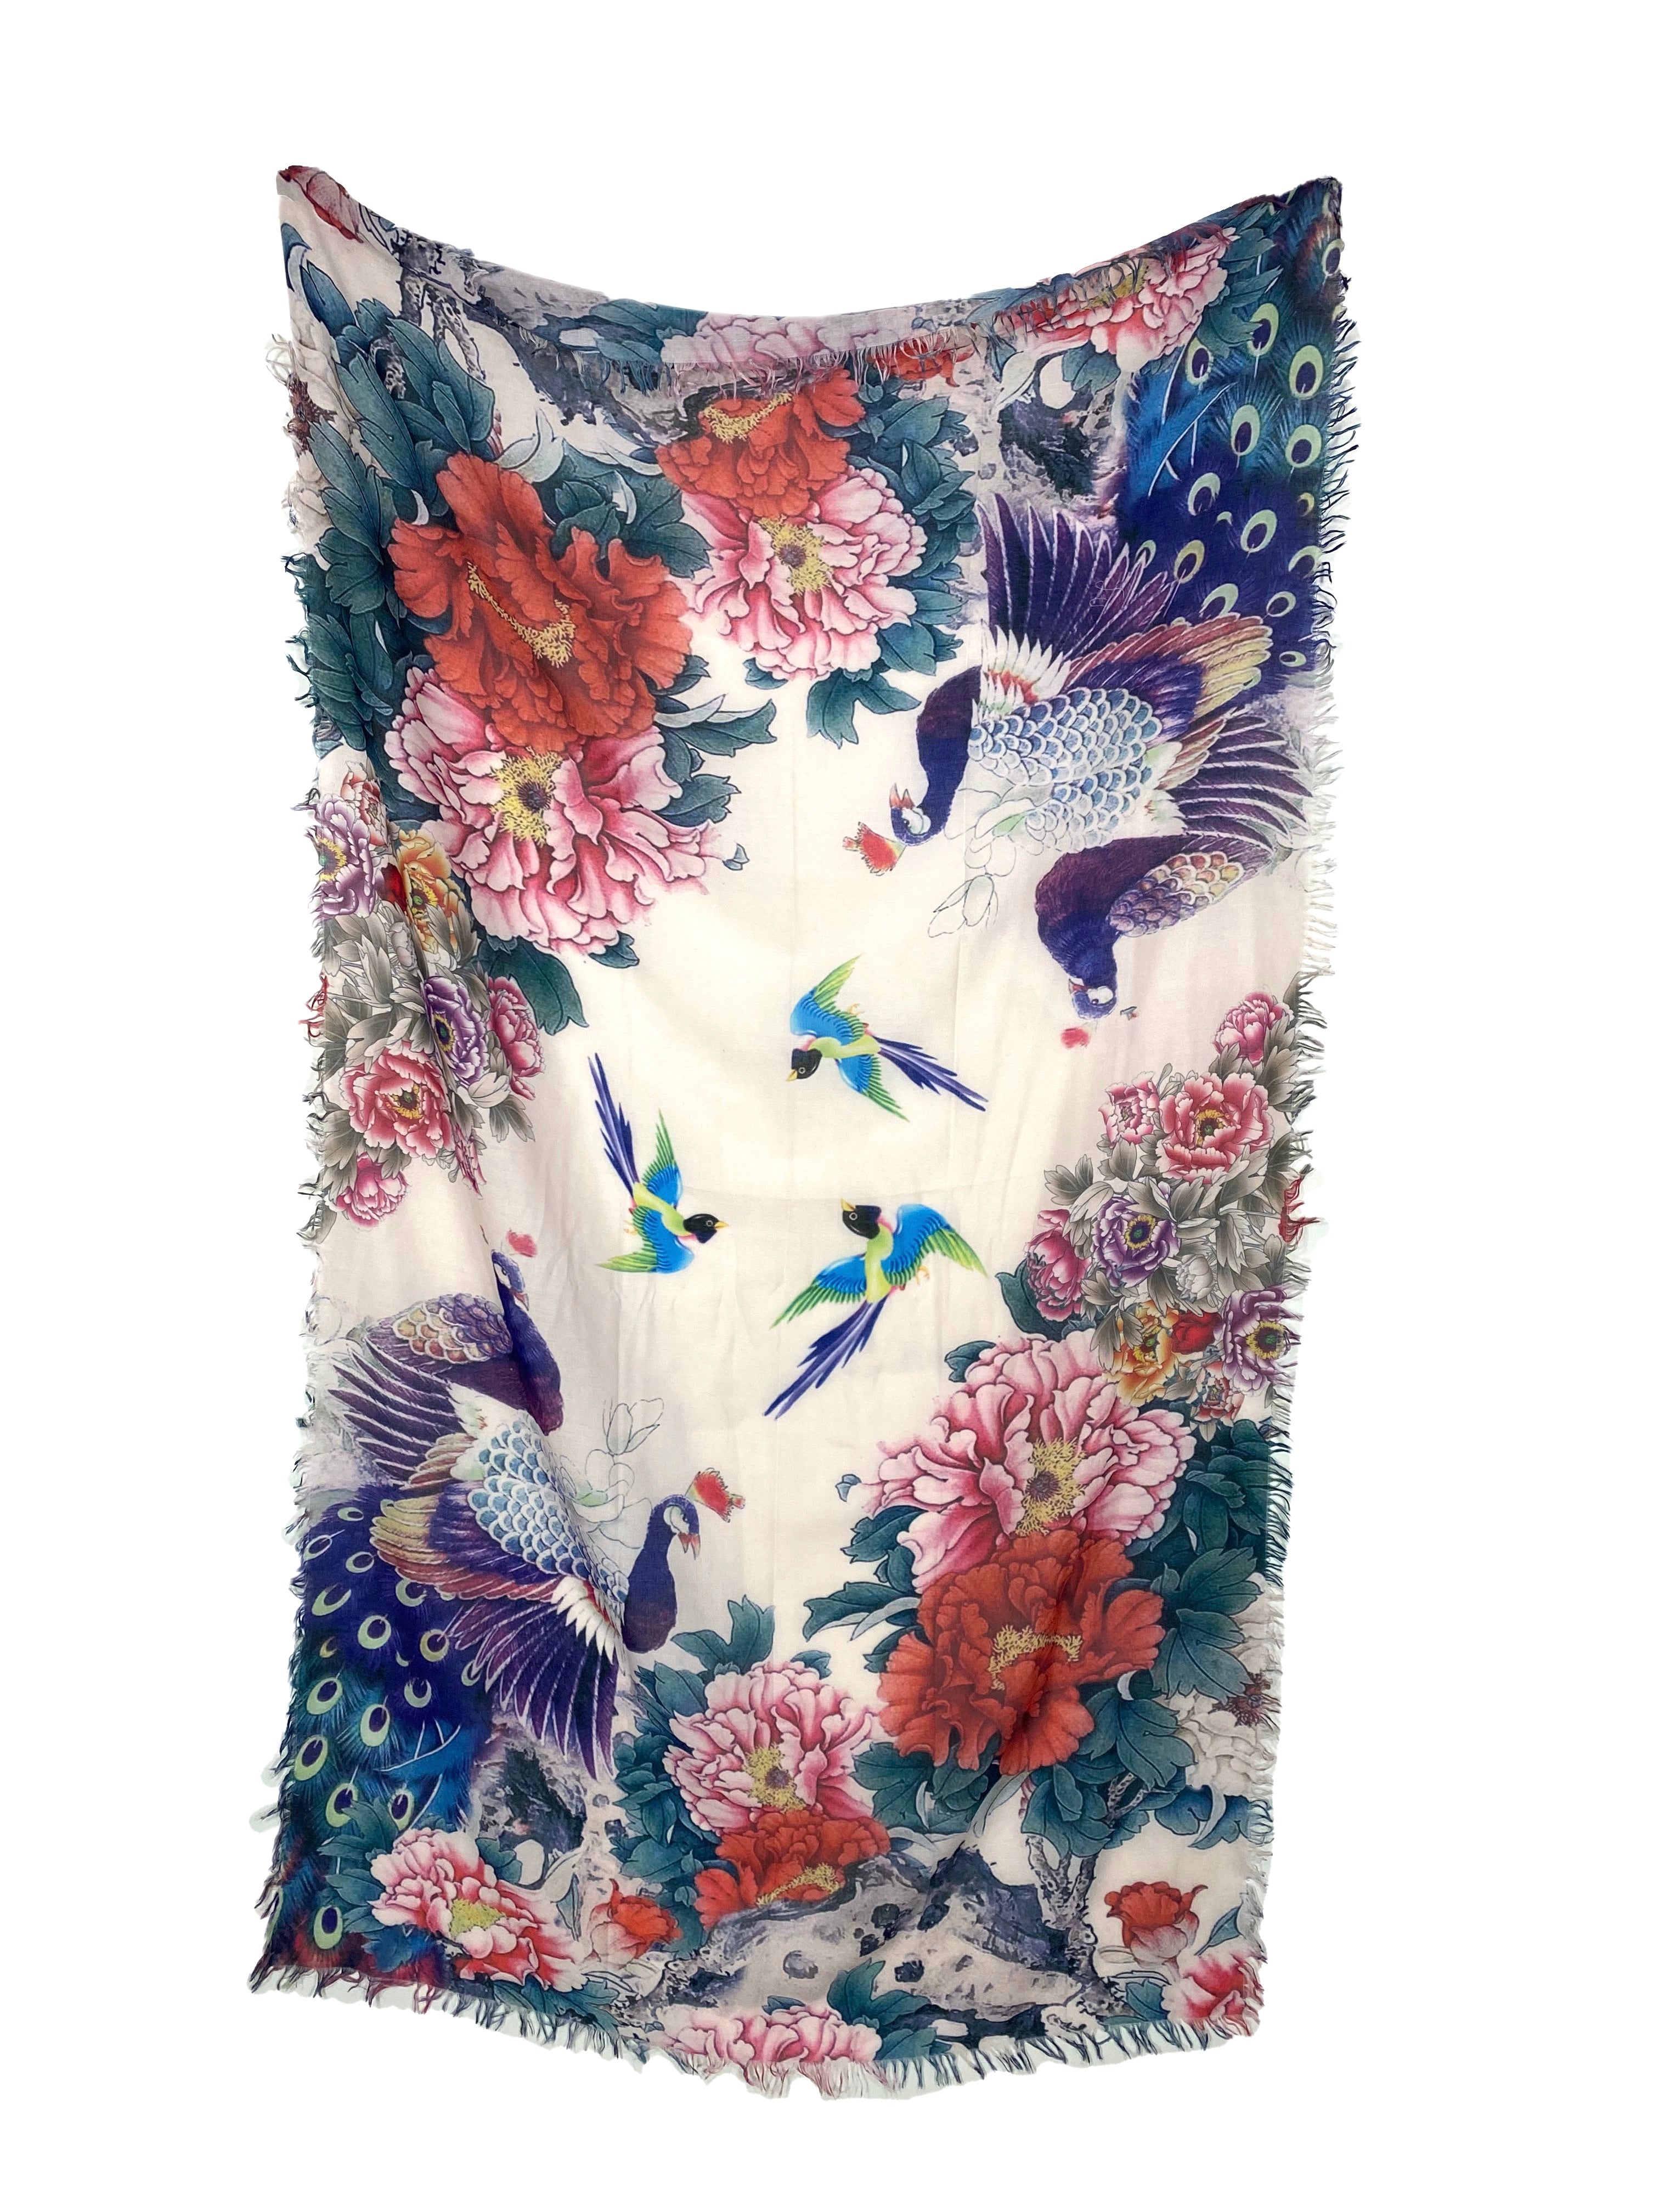 Floral Peacock 100% Cotton Scarf    